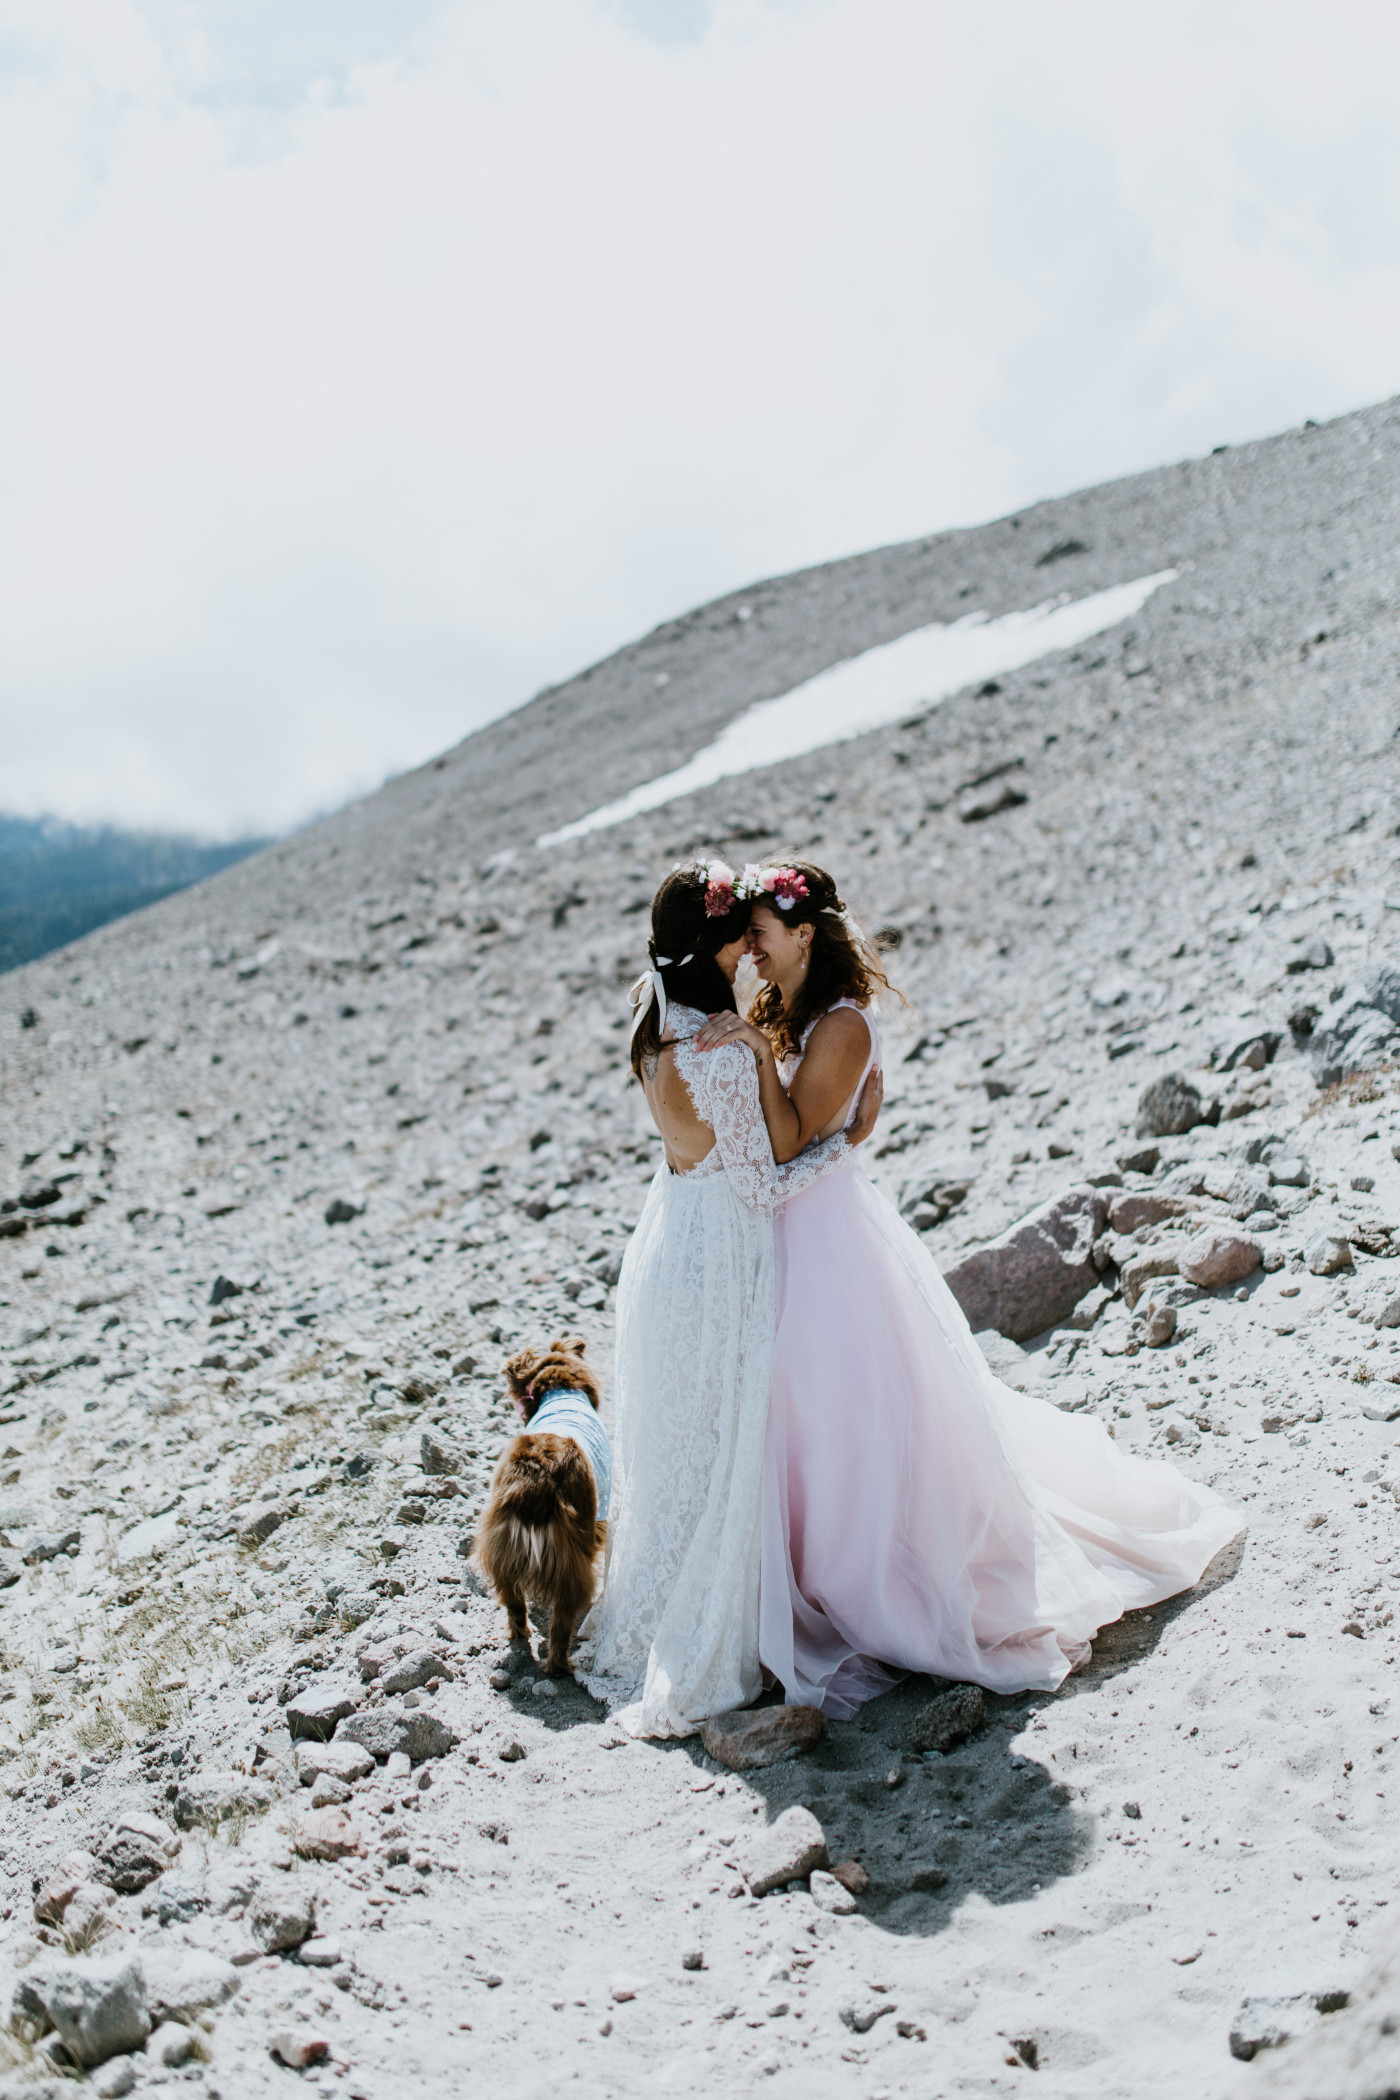 Margaux and Heather stand forehead to forehead along the rocks. Elopement photography at Mount Hood by Sienna Plus Josh.